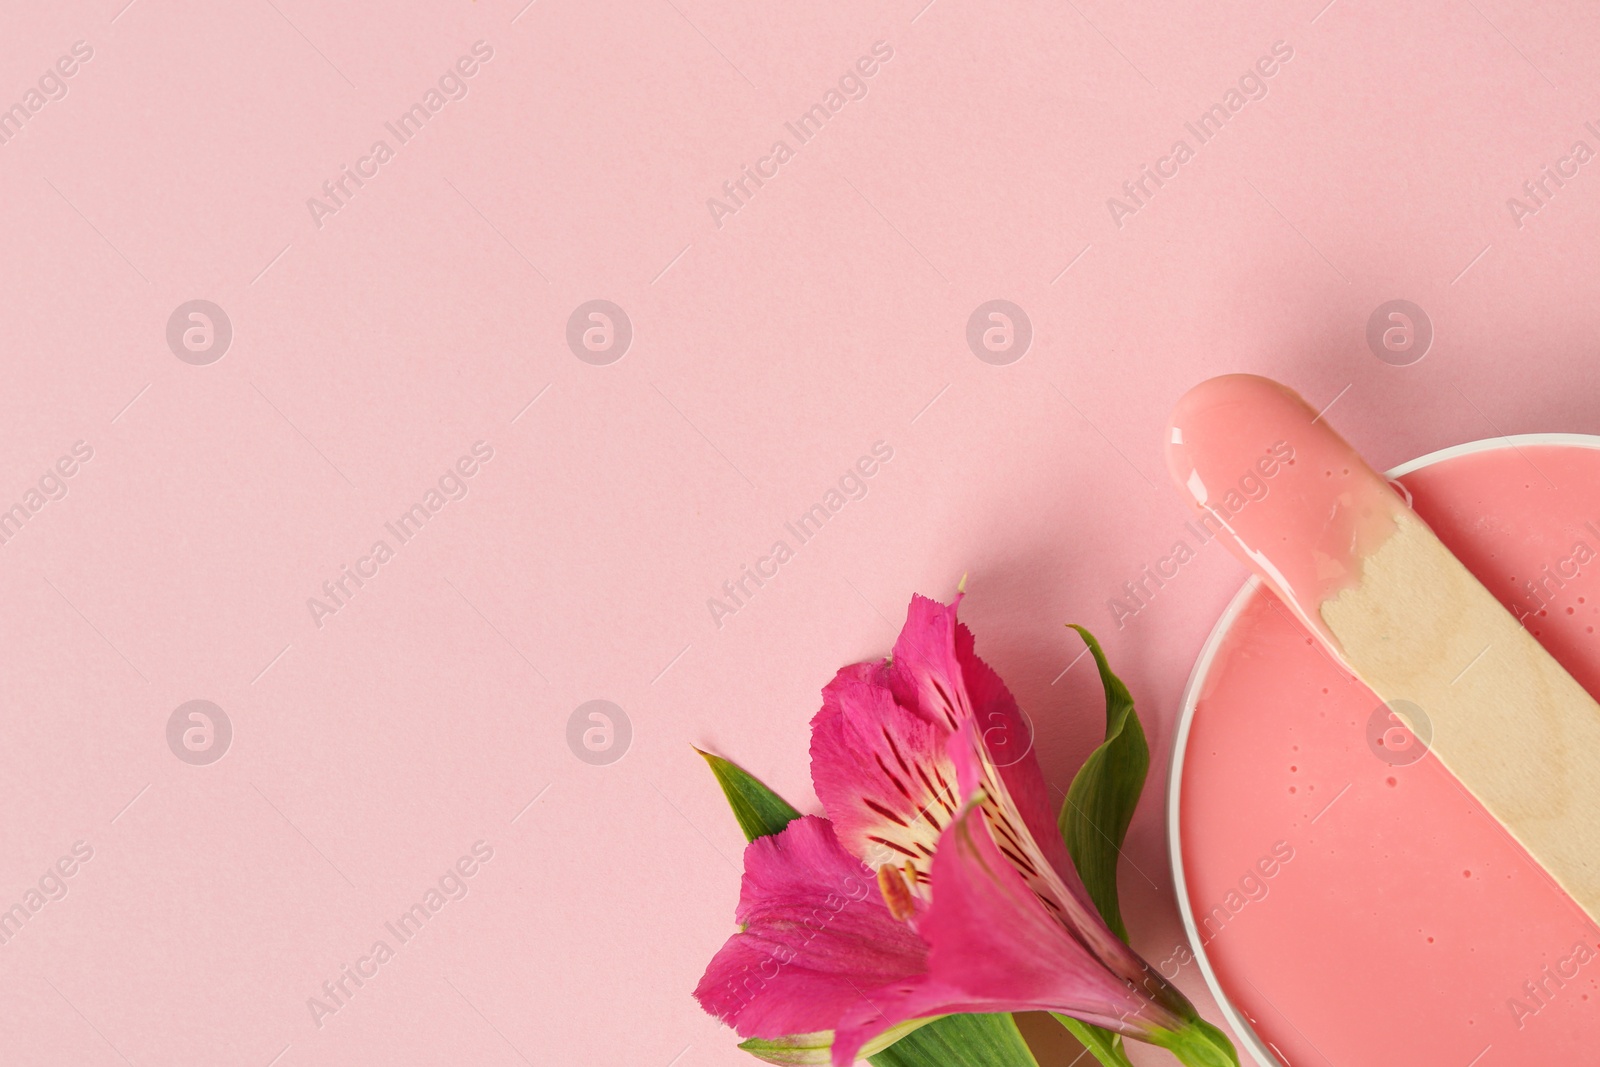 Photo of Wooden spatula, hot depilatory wax and flower on light pink background, flat lay. Space for text